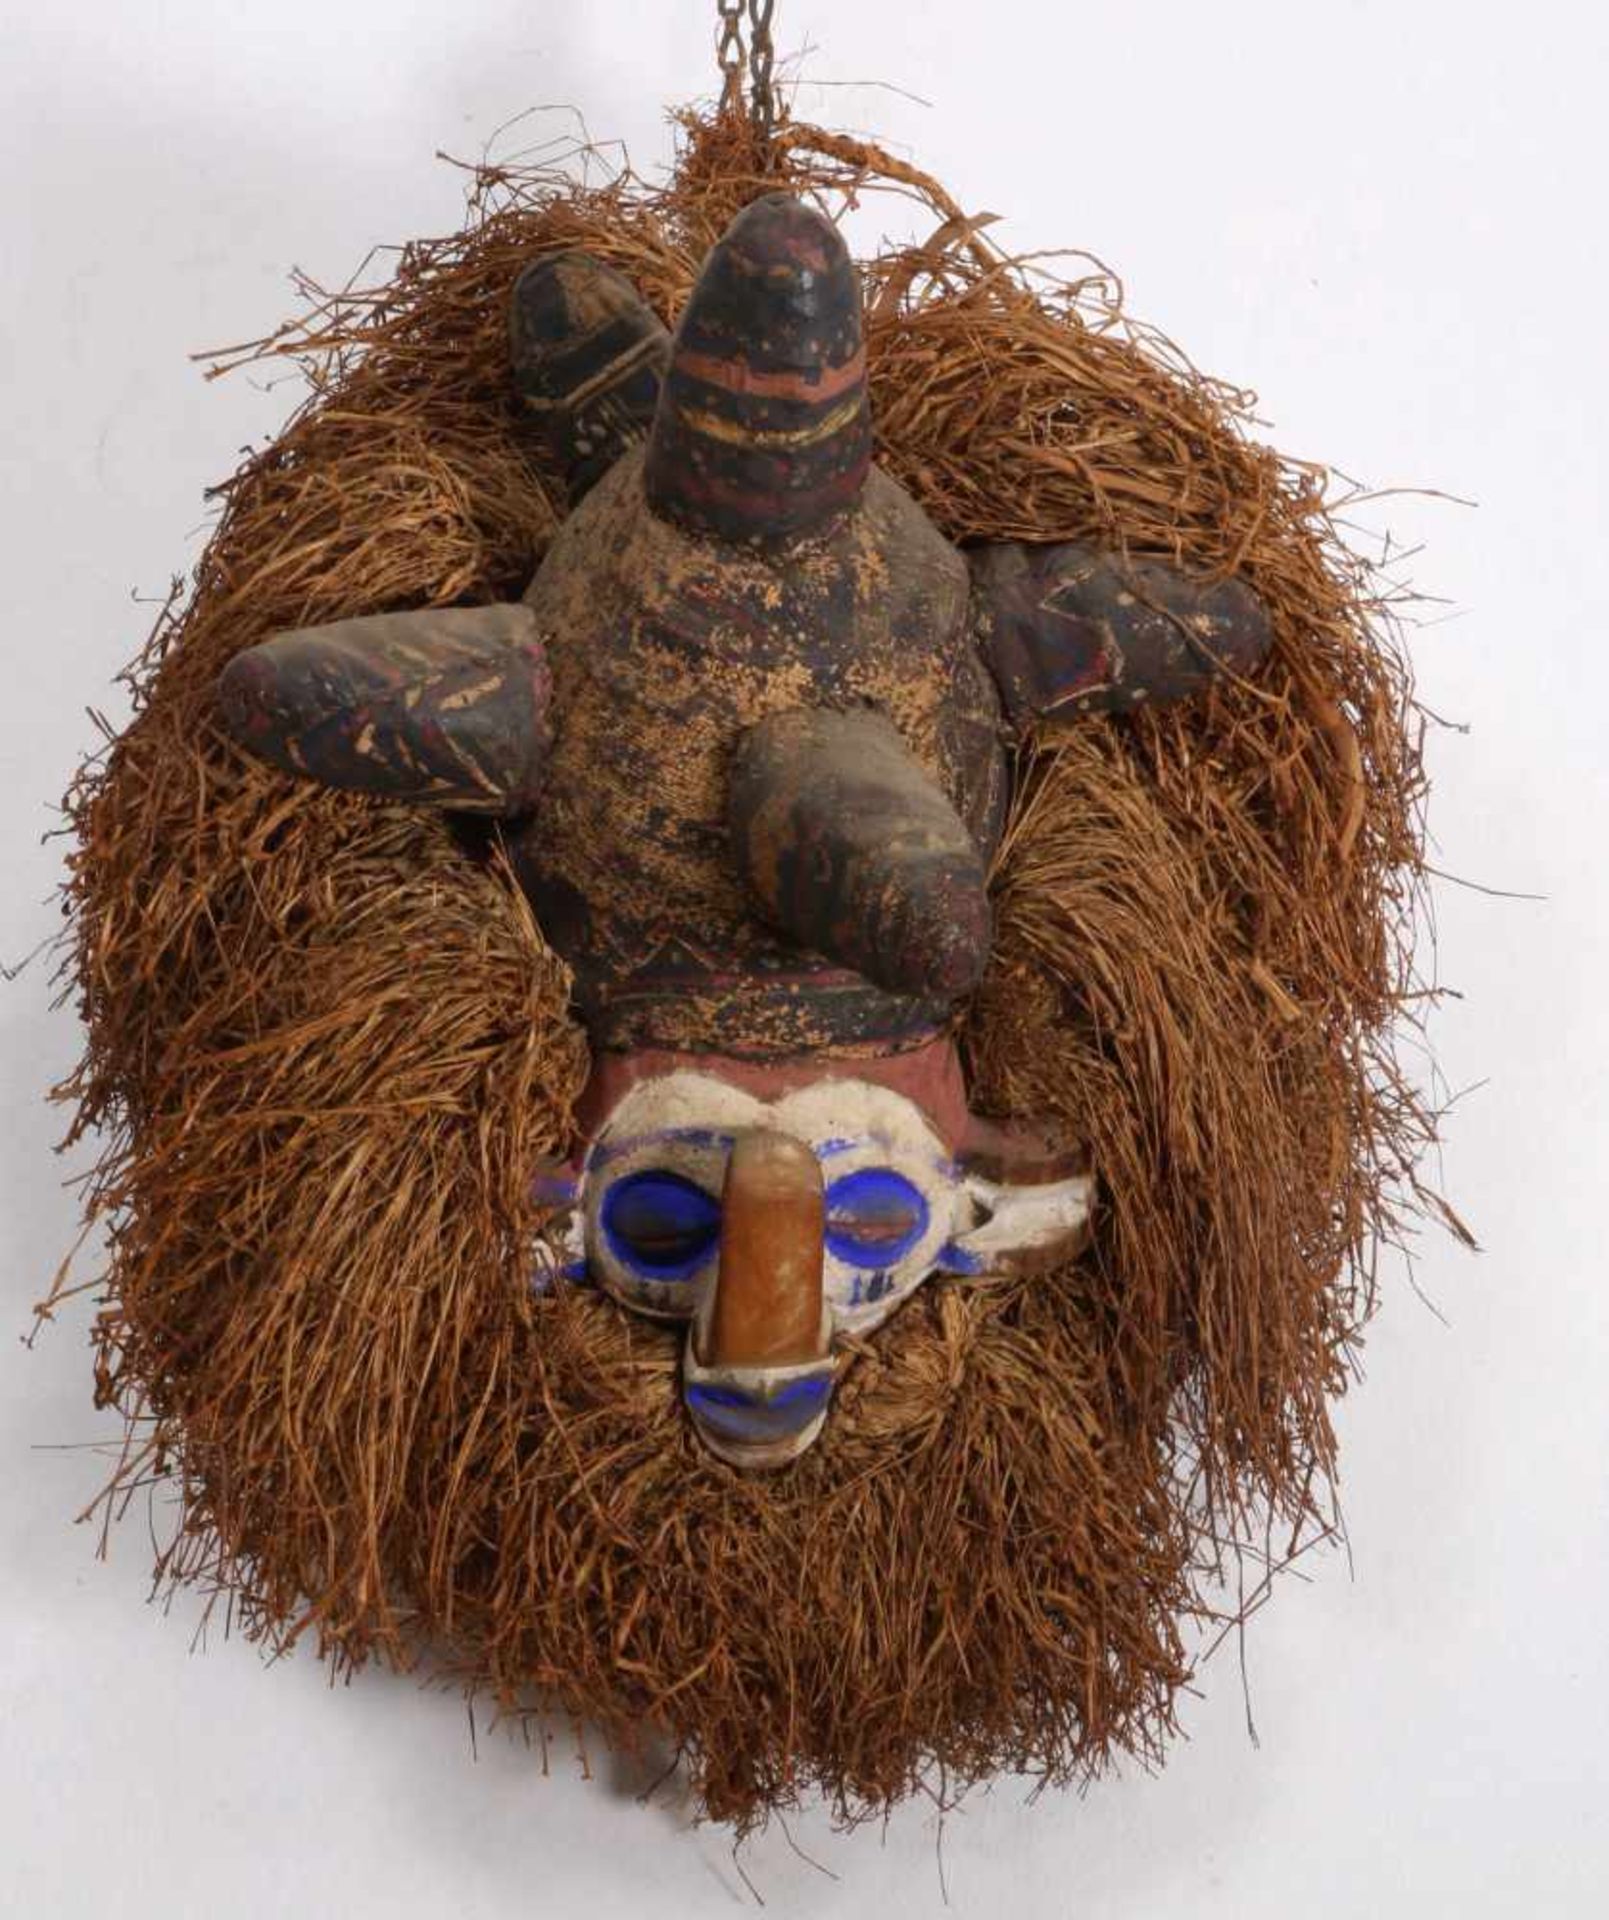 DRC., Nkanu, hand held maskwith elaborate hairstyle and large upright bent nose. With blue, zwart,